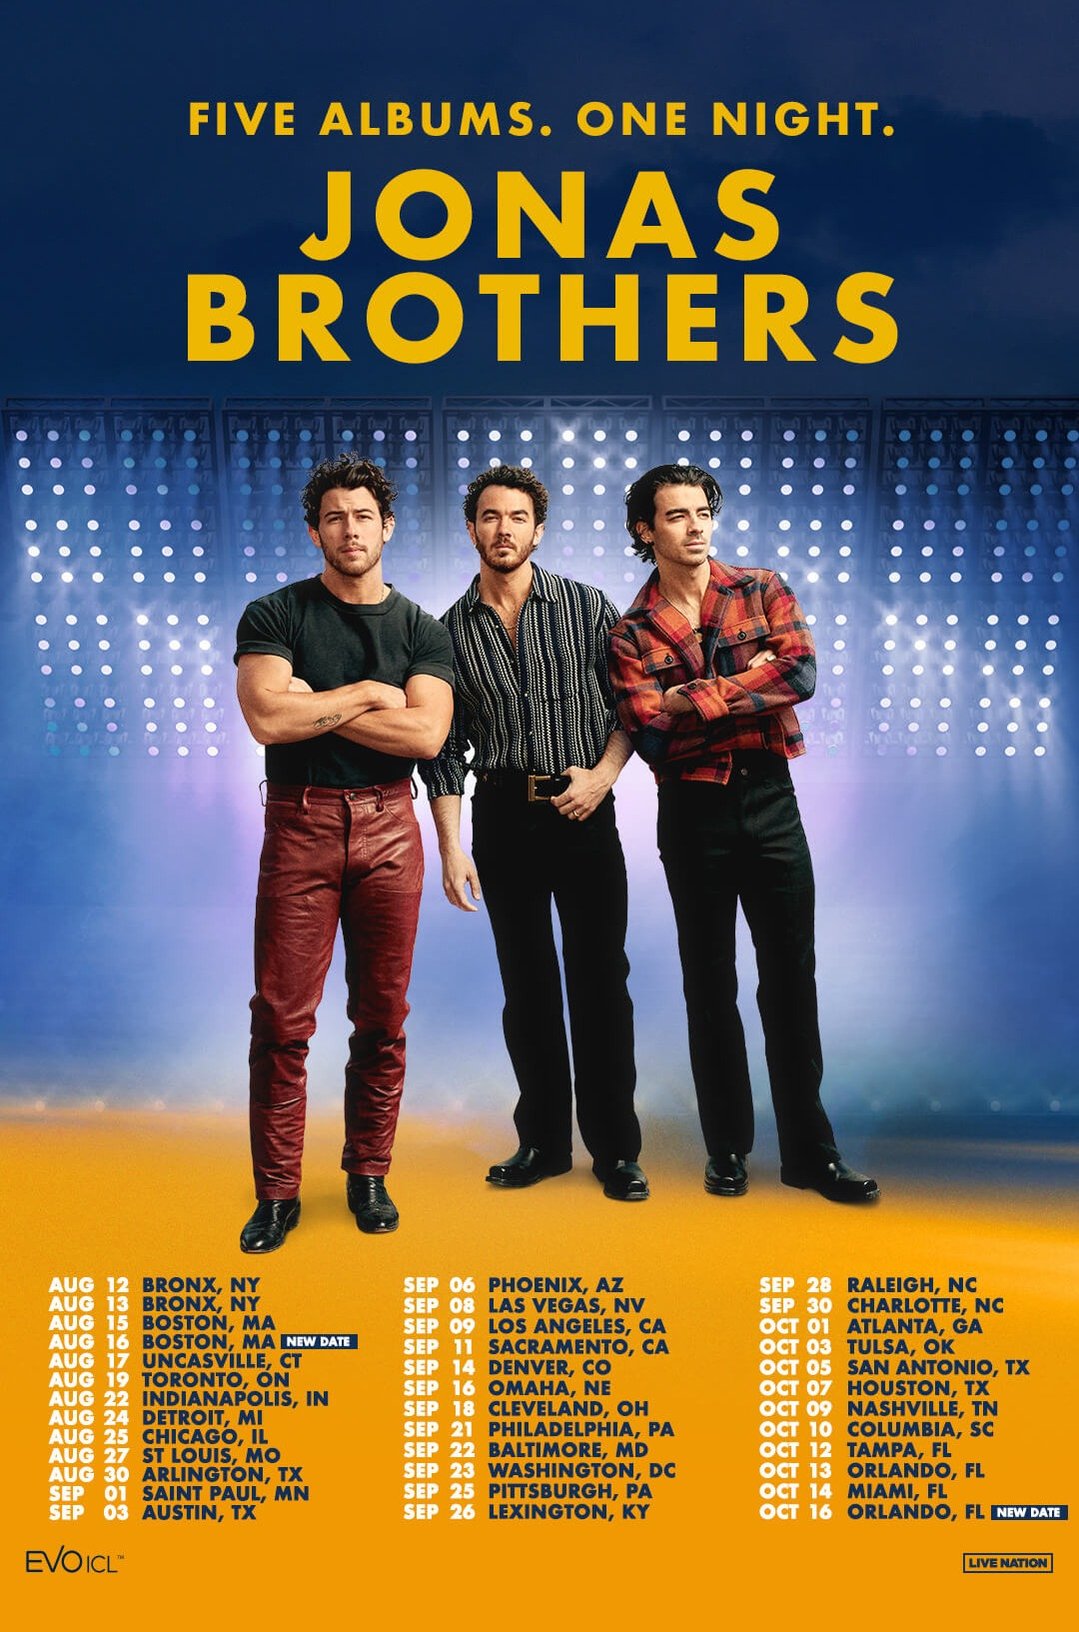 jonas brothers tour dates and locations